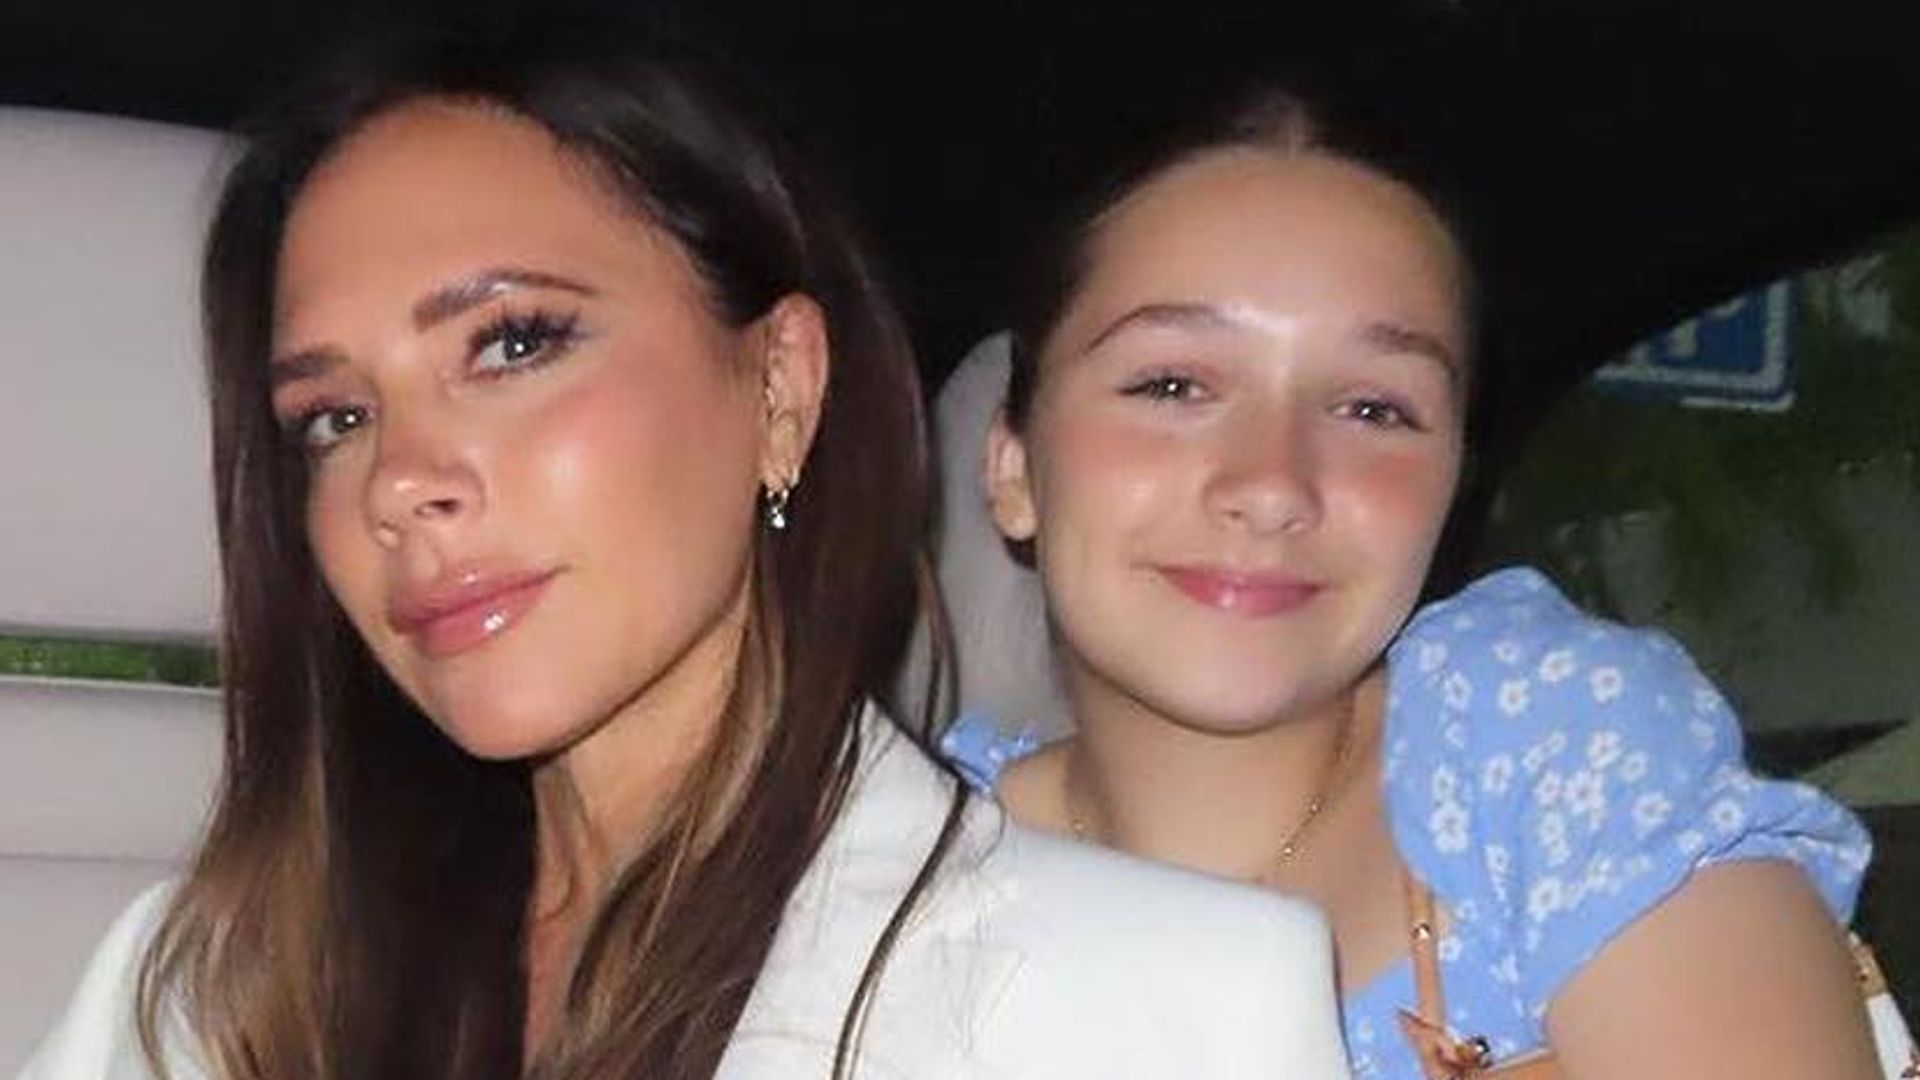 Harper Beckham has a new hairdo and it's not very Posh Spice